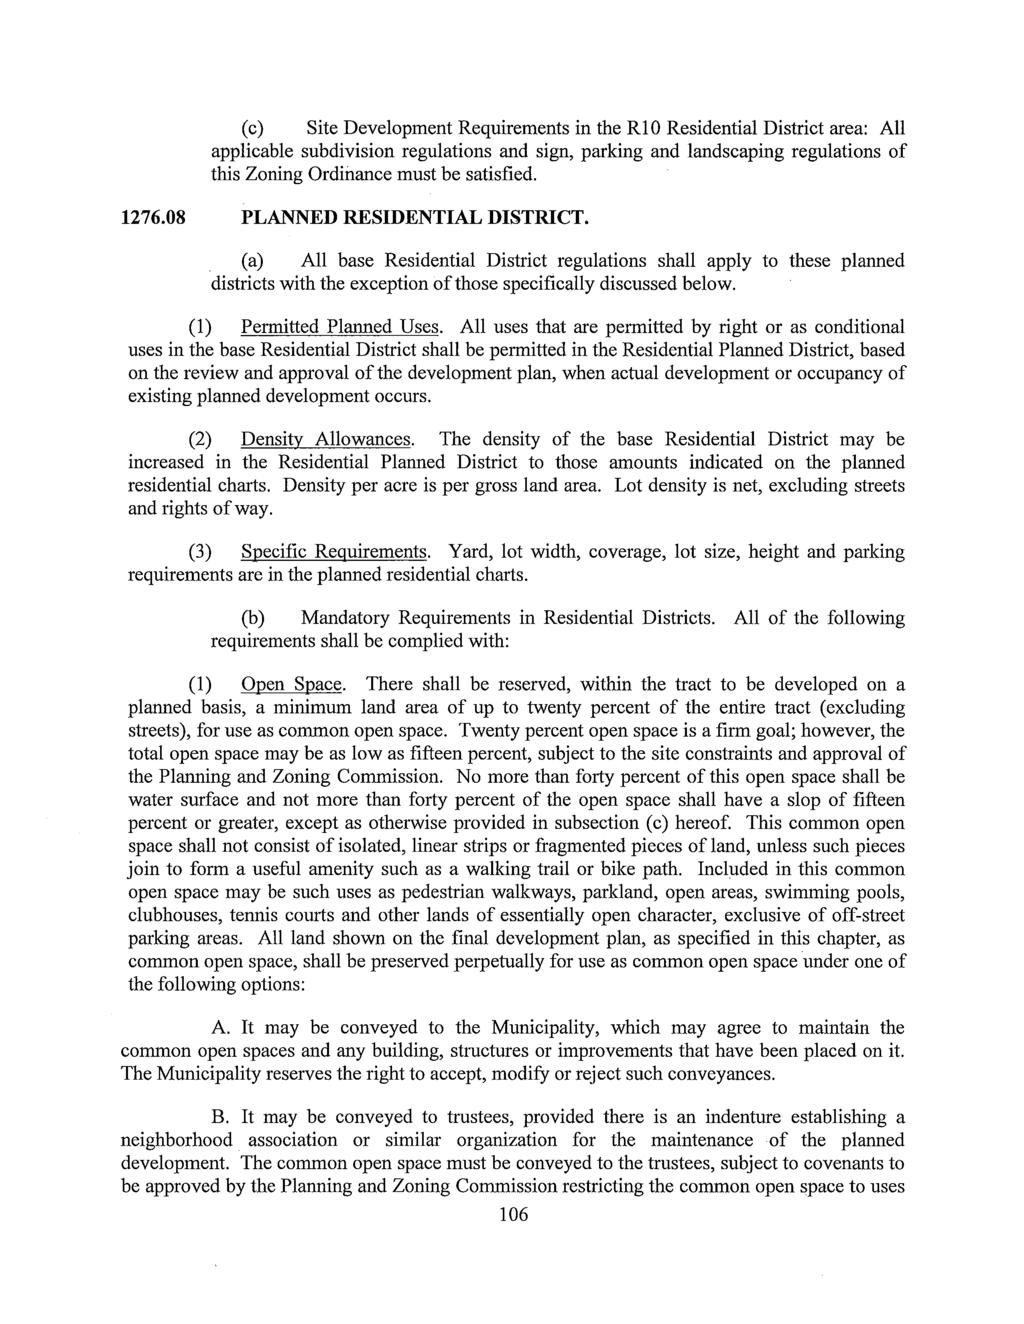 (c) Site Development Requirements in the R10 Residential District area: All applicable subdivision regulations and sign, parking and landscaping regulations of this Zoning Ordinance must be satisfied.